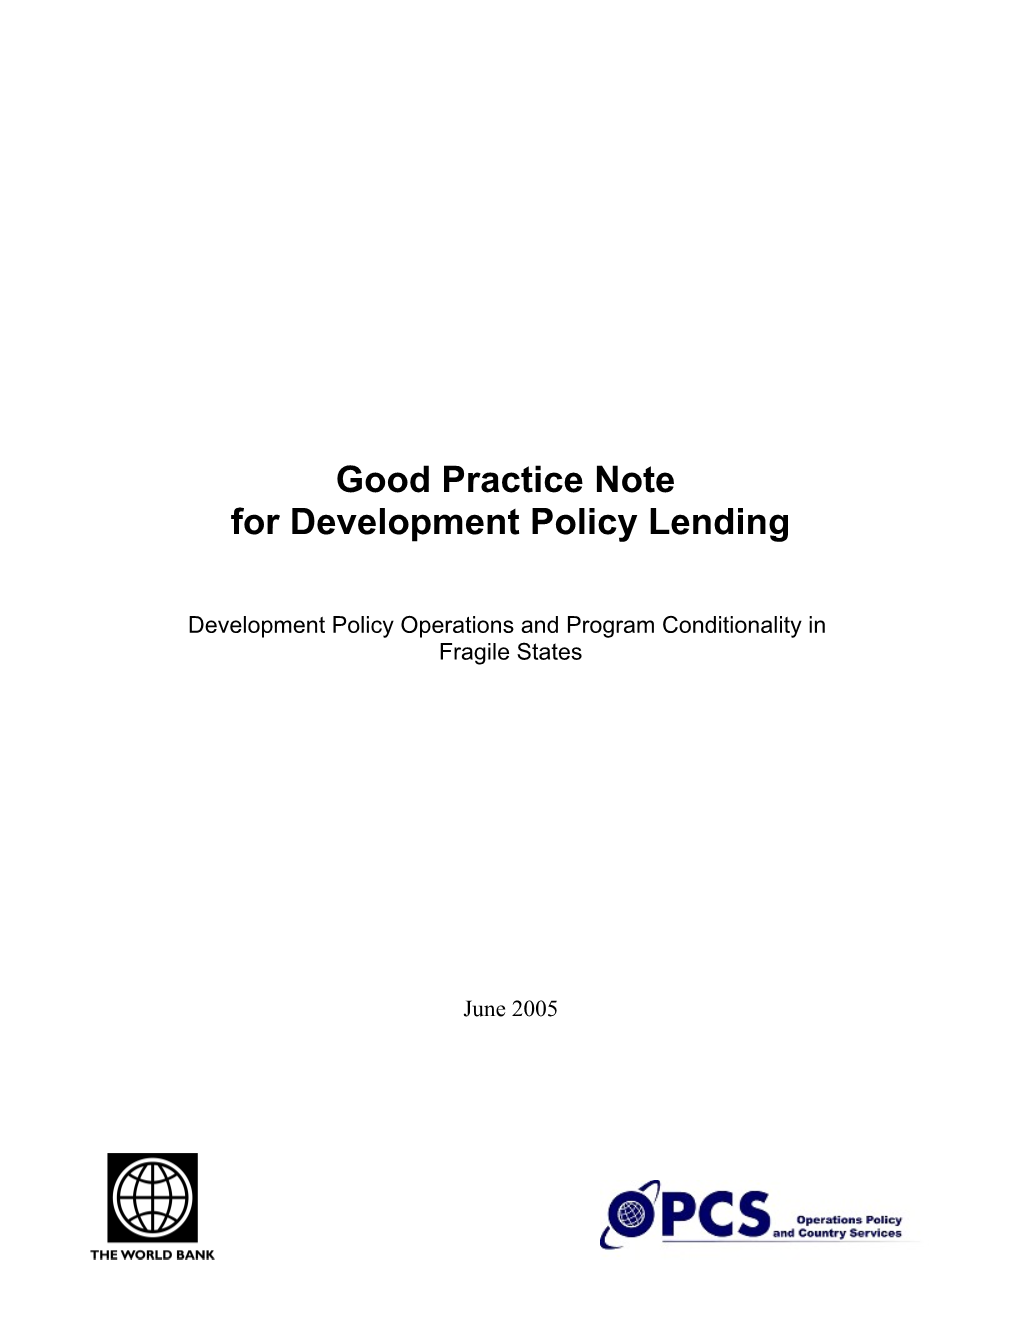 Good Practice Note for Development Policy Lending